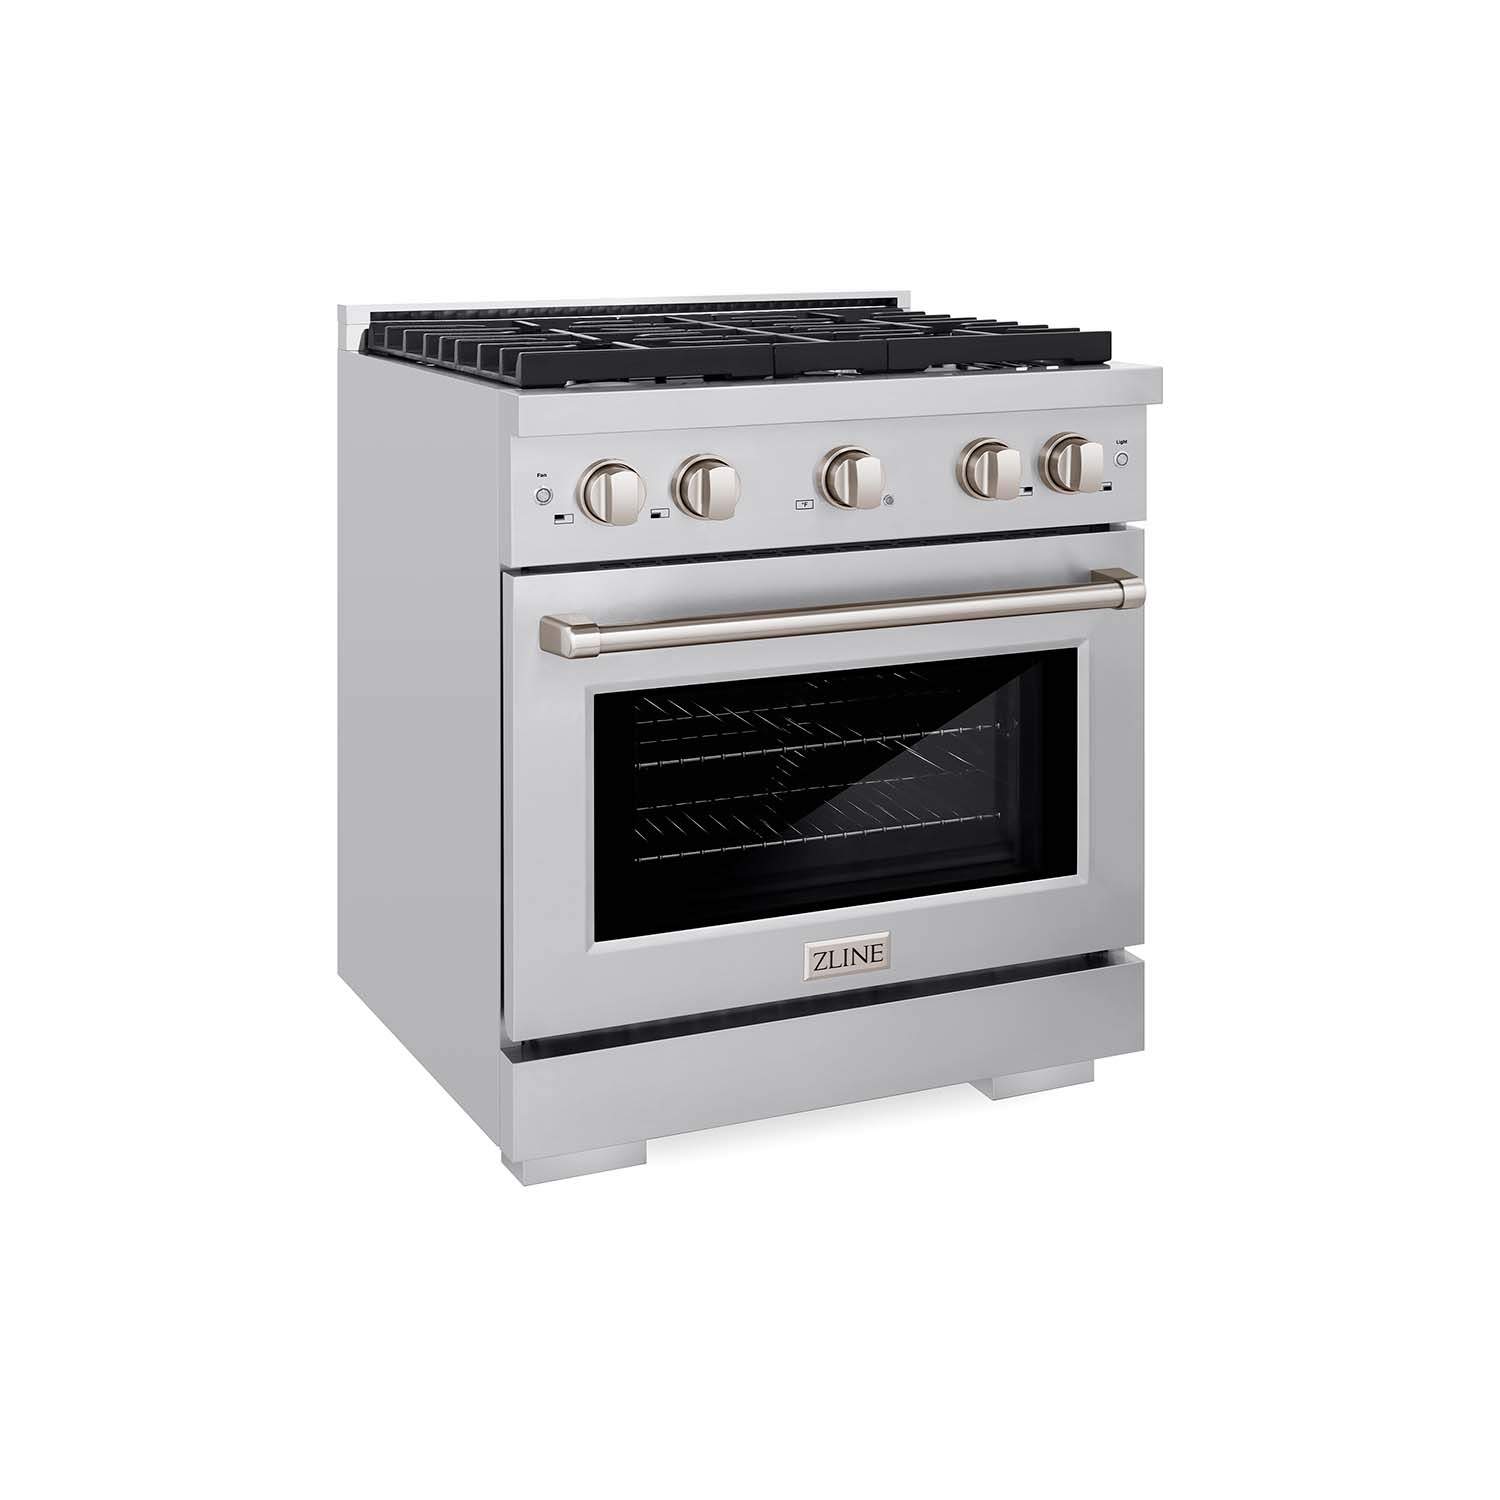 ZLINE 30" Stainless Steel Gas Range front-side angle.